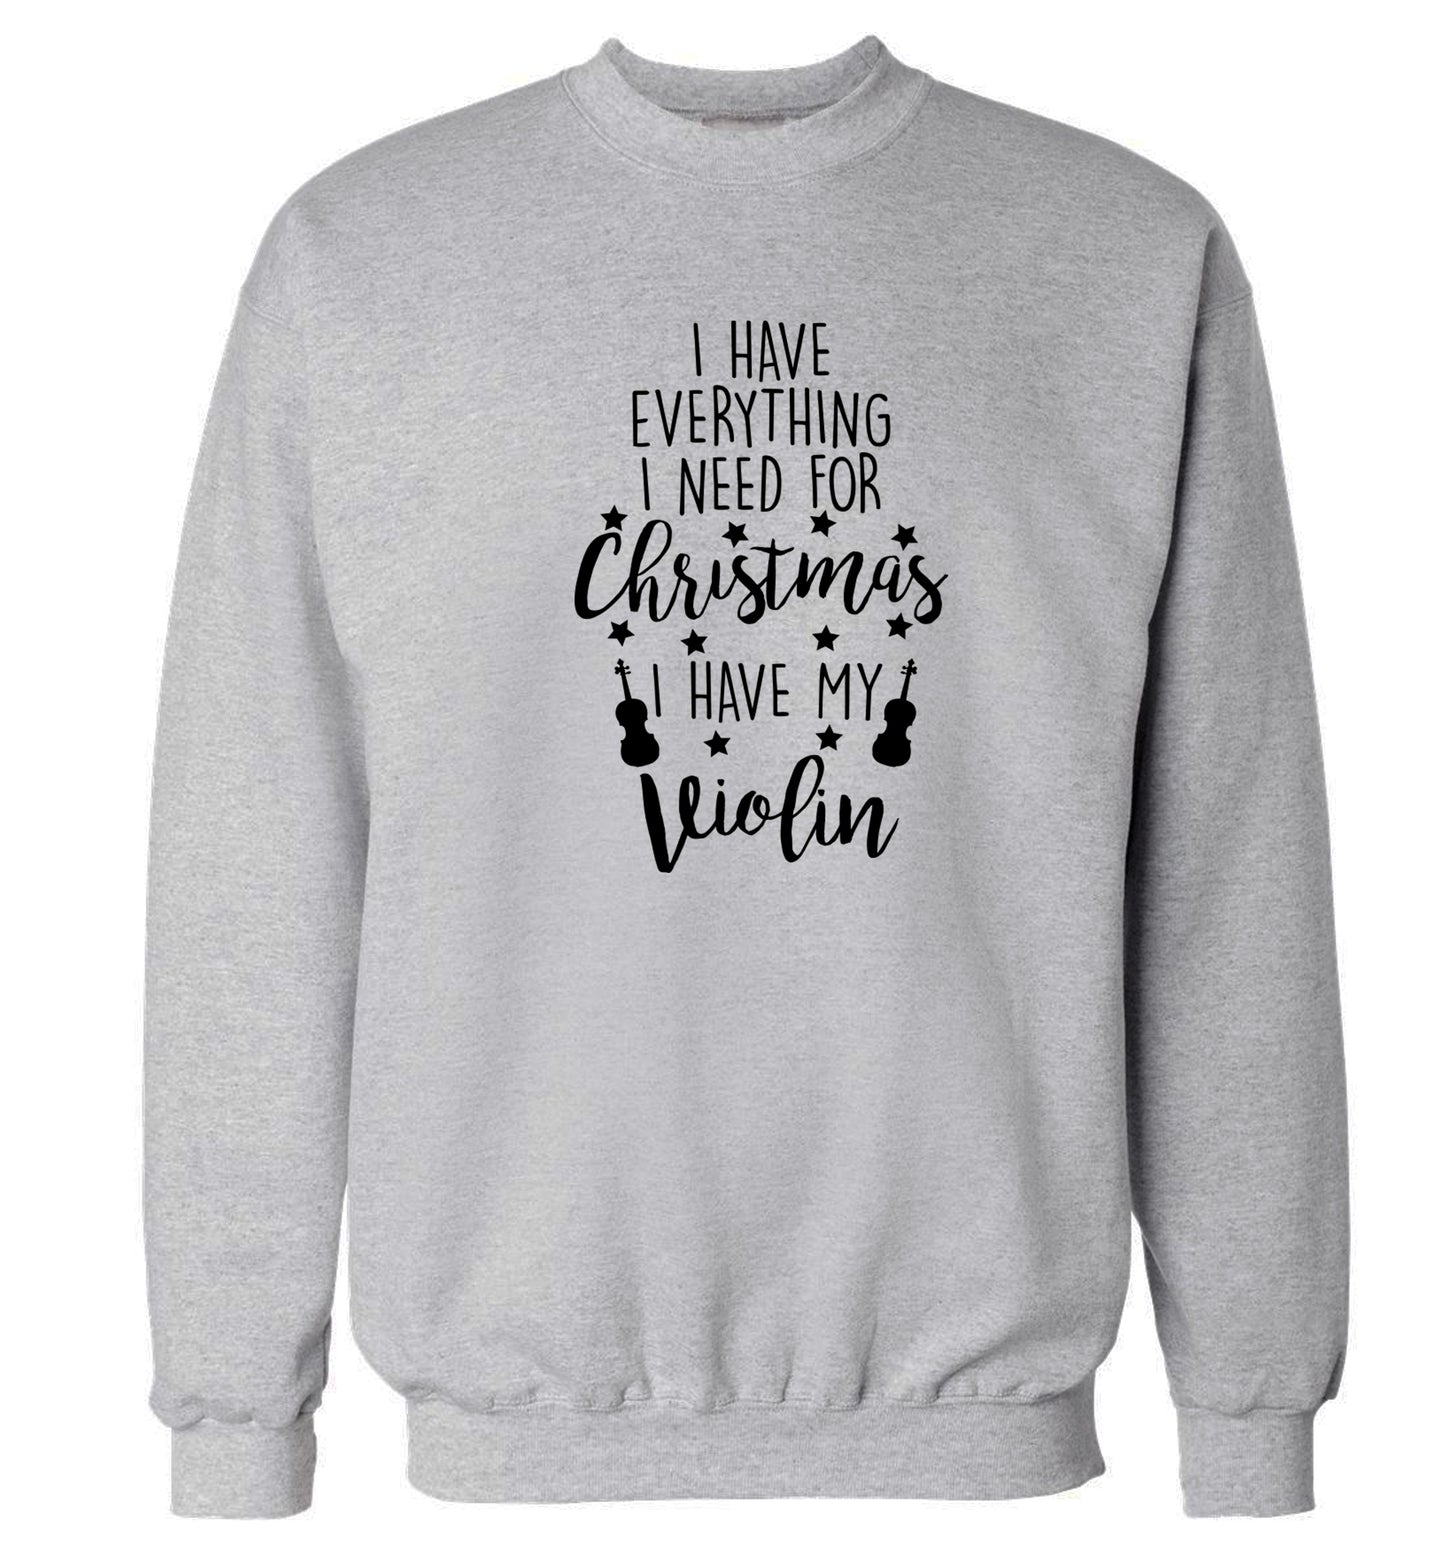 I have everything I need for Christmas I have my violin Adult's unisex grey Sweater 2XL